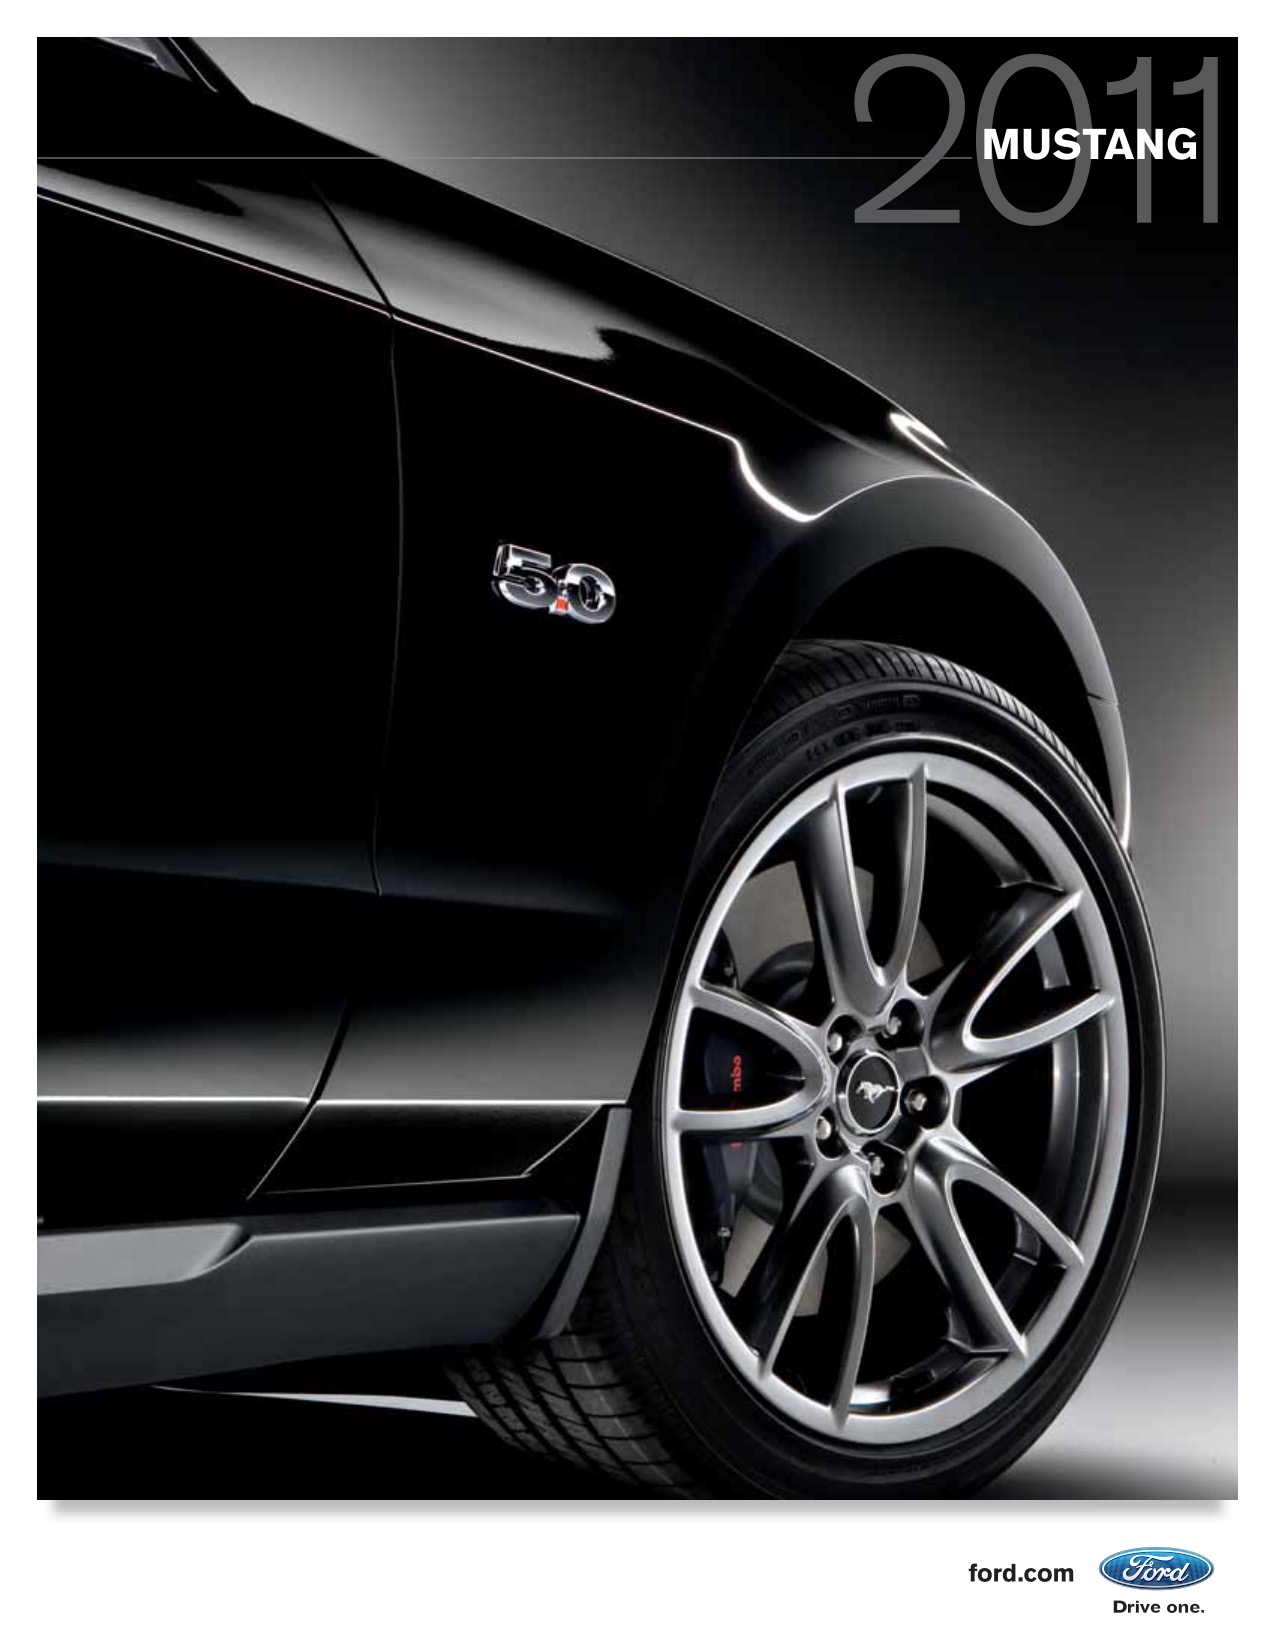 2011 Ford Mustang Brochure